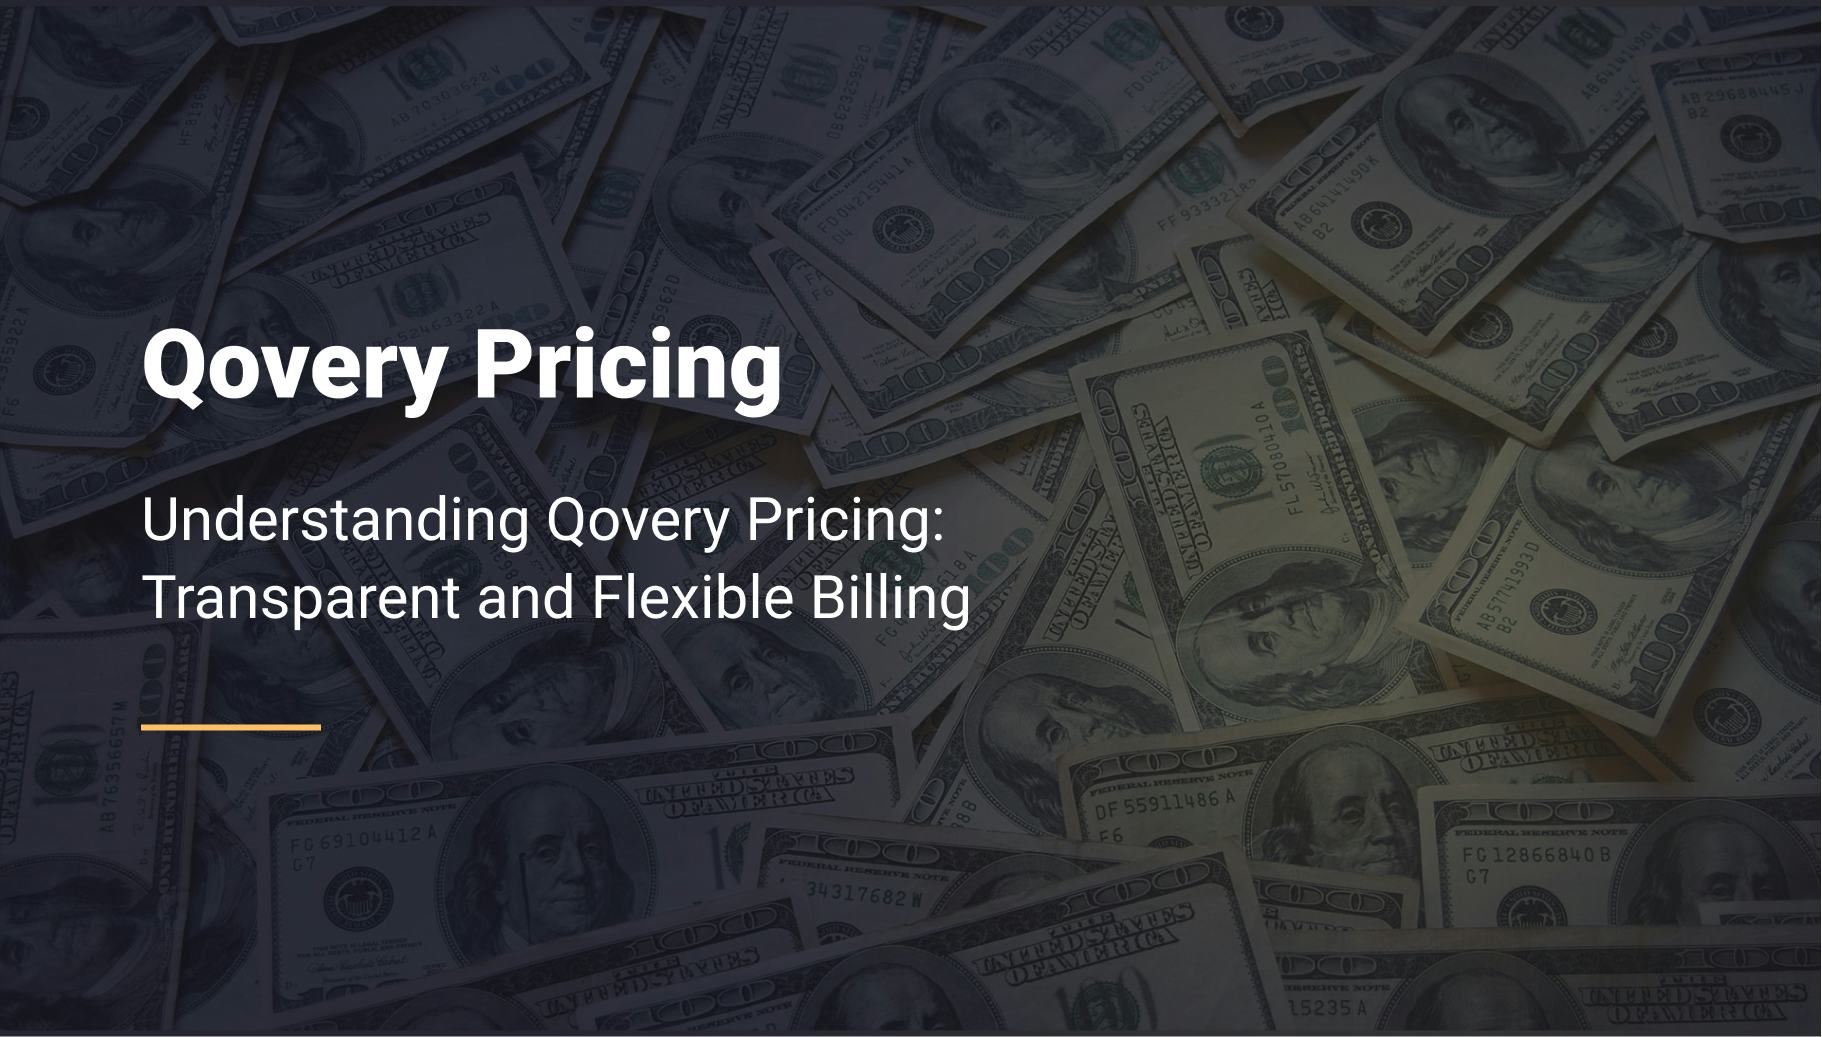 Understanding Qovery Pricing: Transparent and Flexible Billing